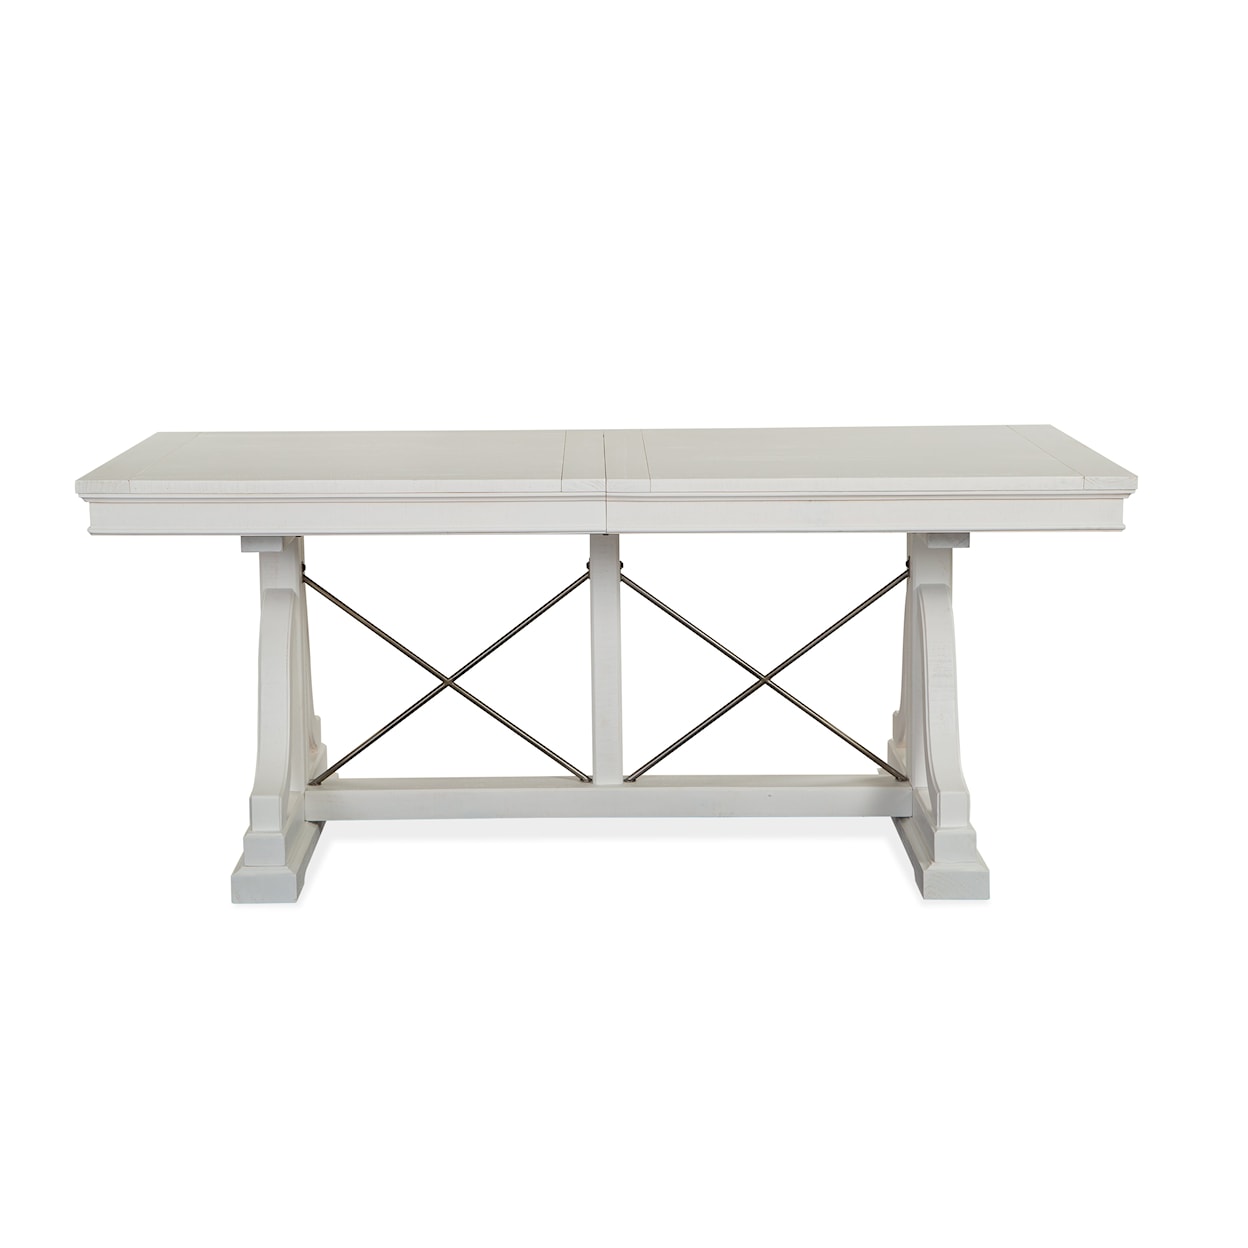 Magnussen Home Heron Cove Dining Dining Trestle Table